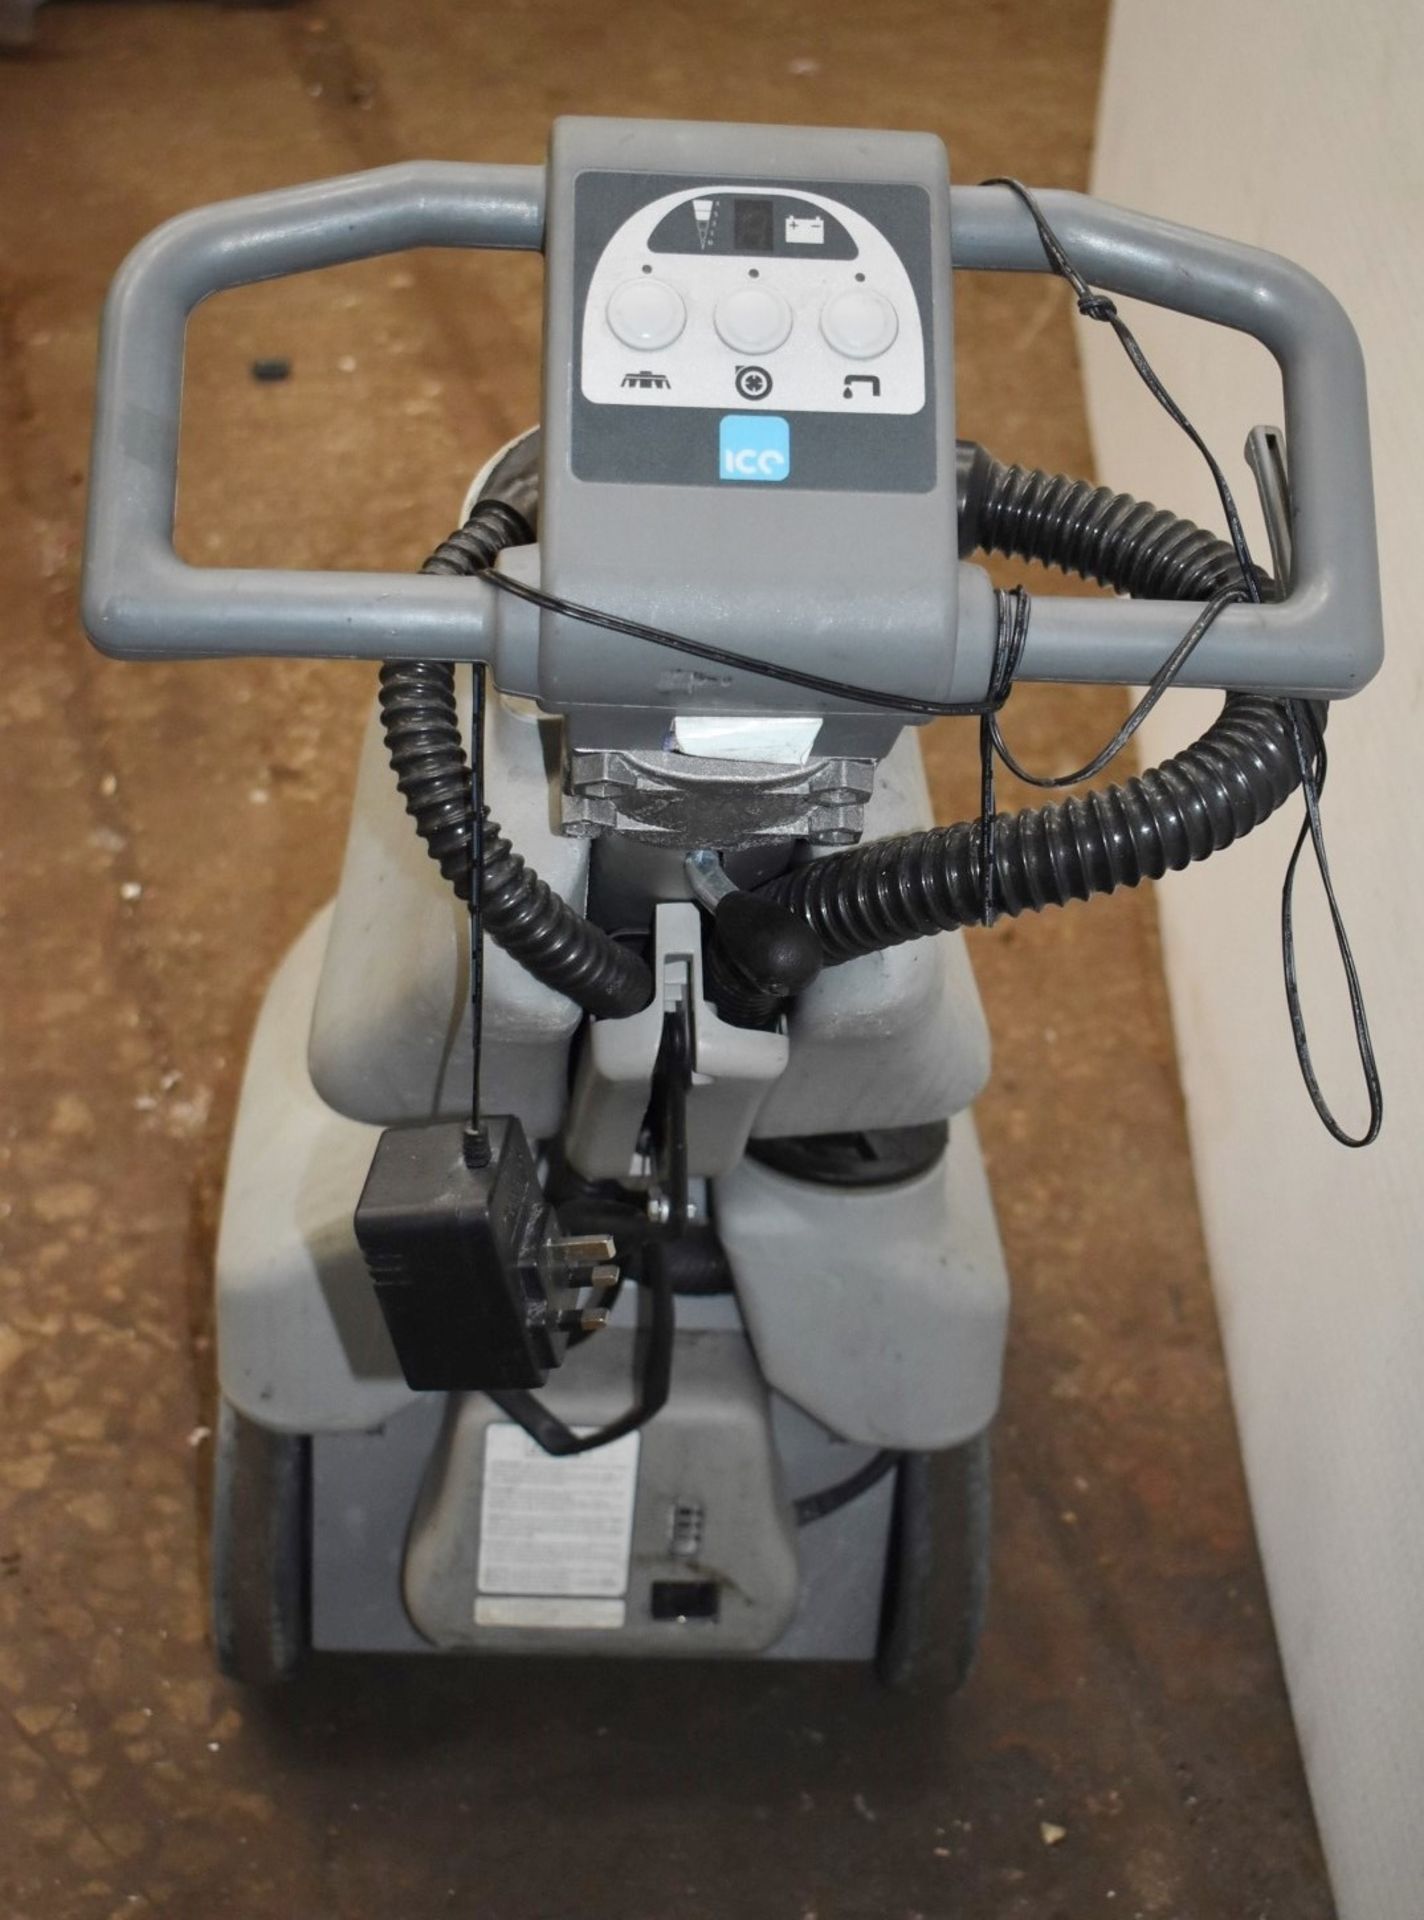 1 x Ice Scrub 35D Compact Floor Scrubber - Recently Removed From a Supermarket Environment Due to - Image 11 of 15